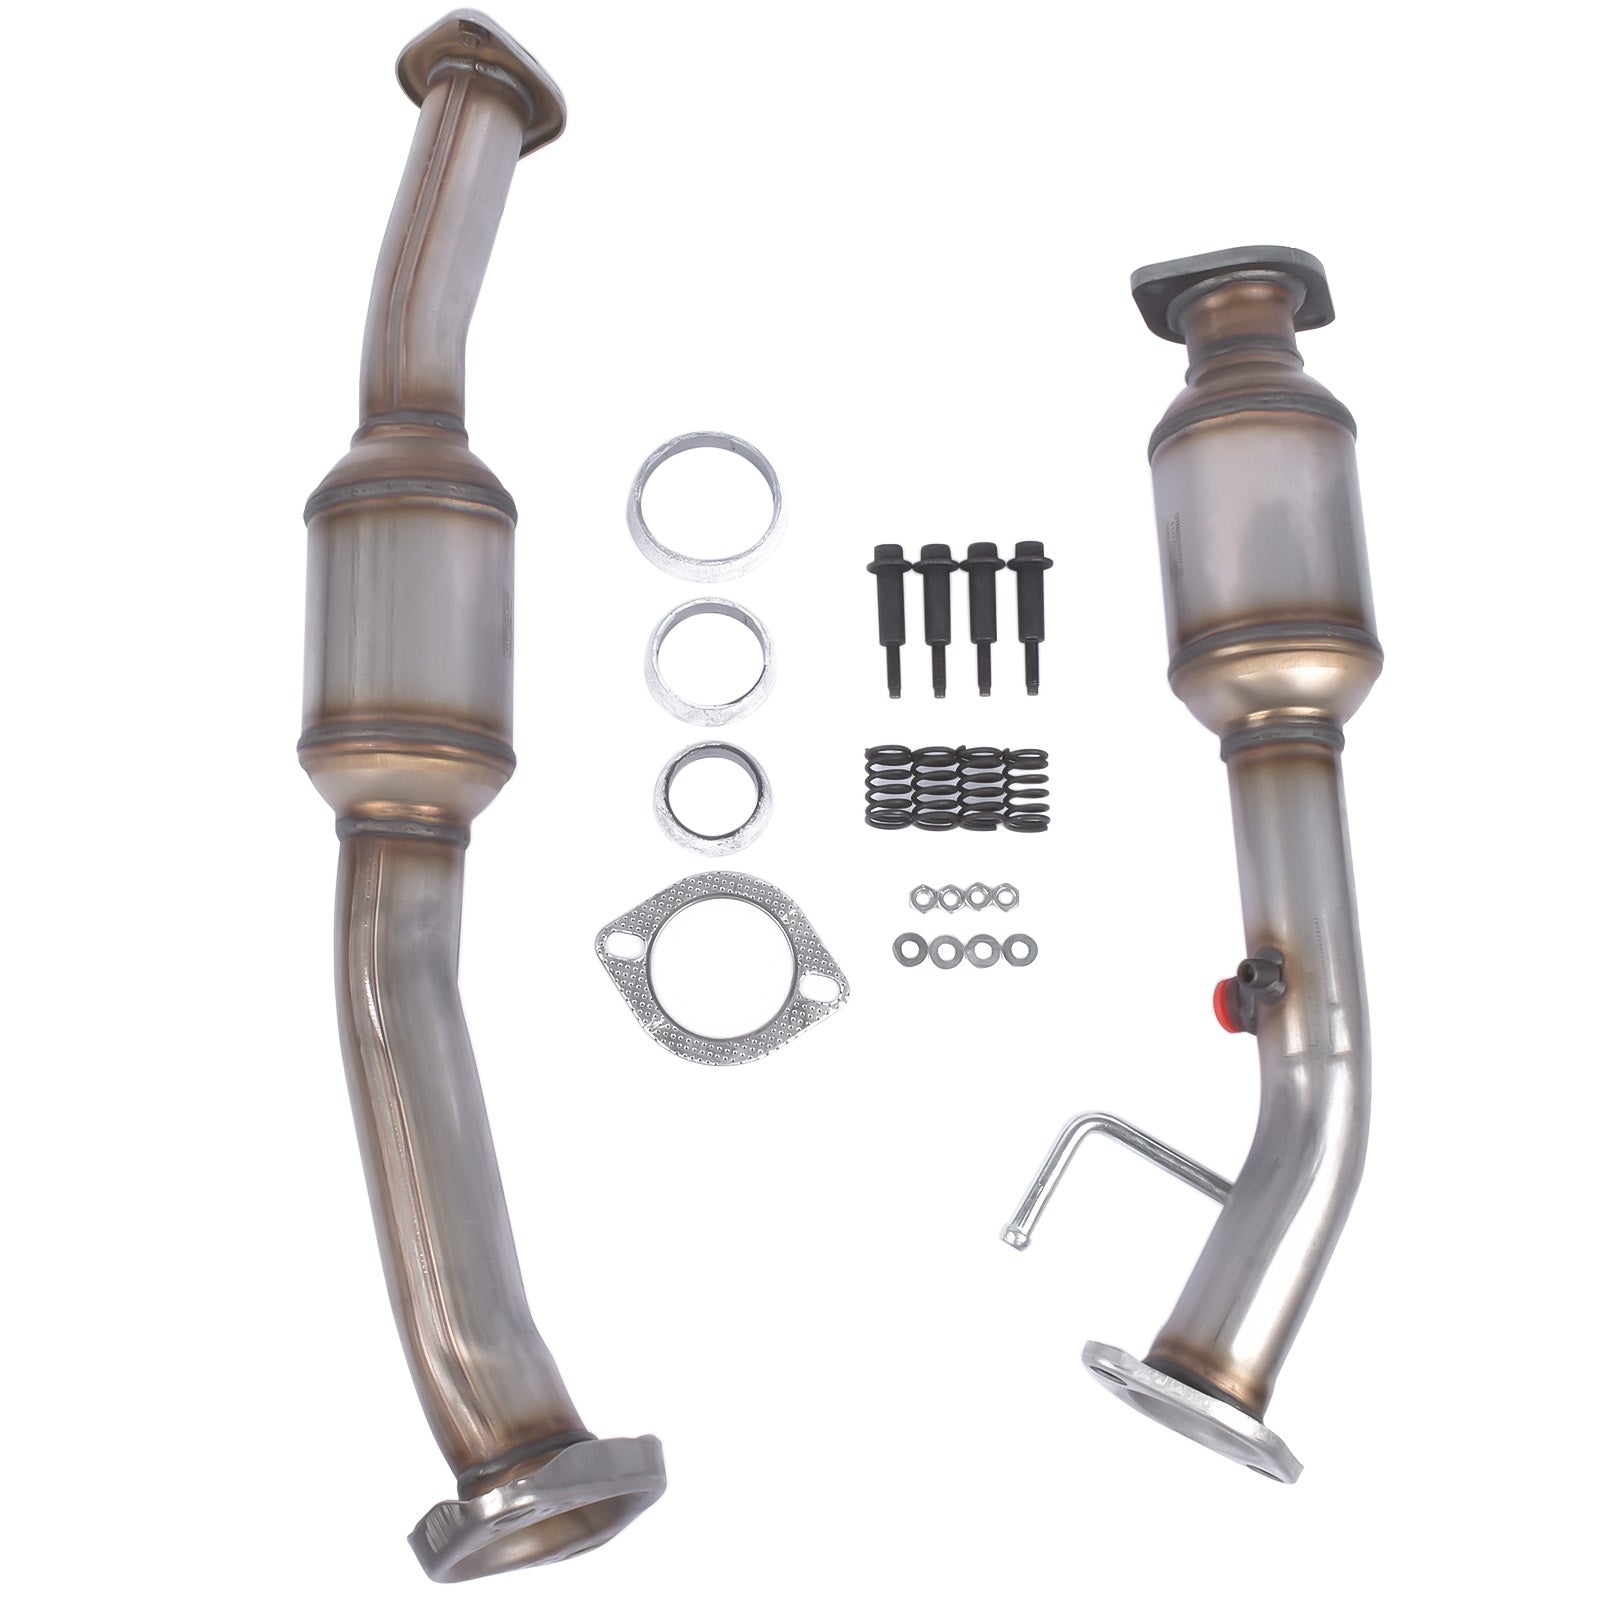 ZNTS 2x Front & Rear Catalytic Converters Fit Nissan NV200 2013-2019 EPA OBD-II Approved 8H41165 75393578